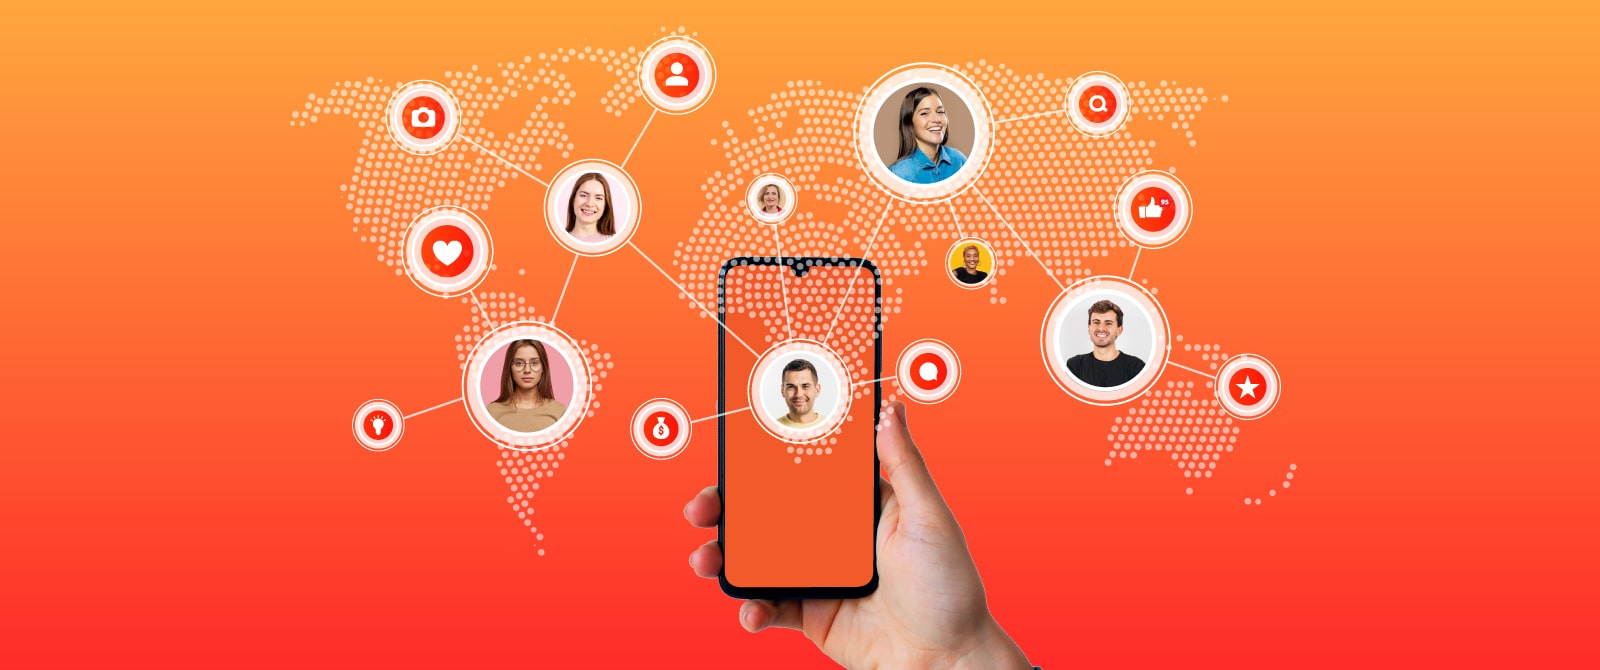 10 Things To Consider When Choosing An Event Matchmaking App